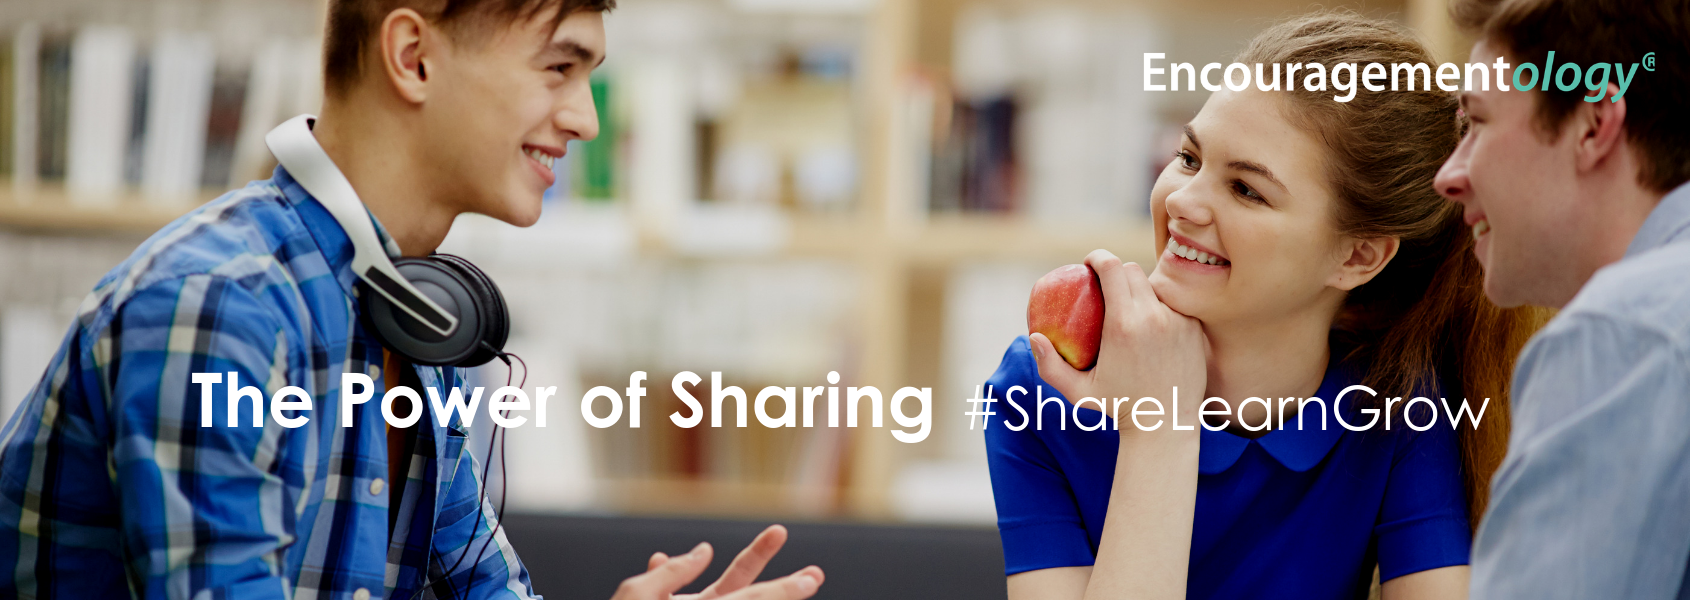 The power of sharing